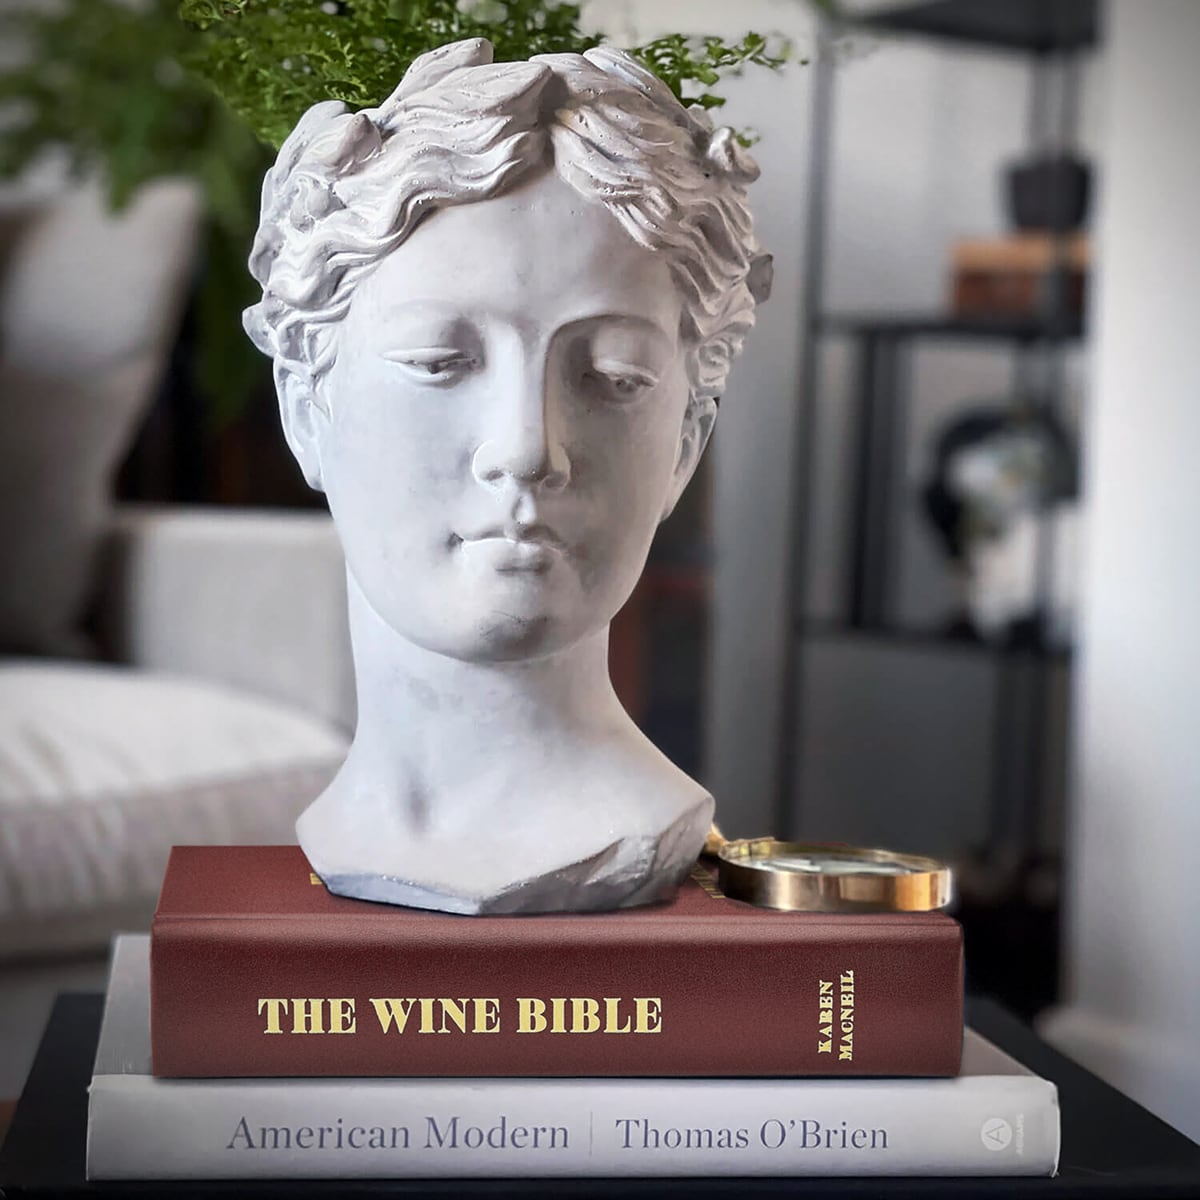 The Wine Bible, Personalized Burgundy Leather Bound Book